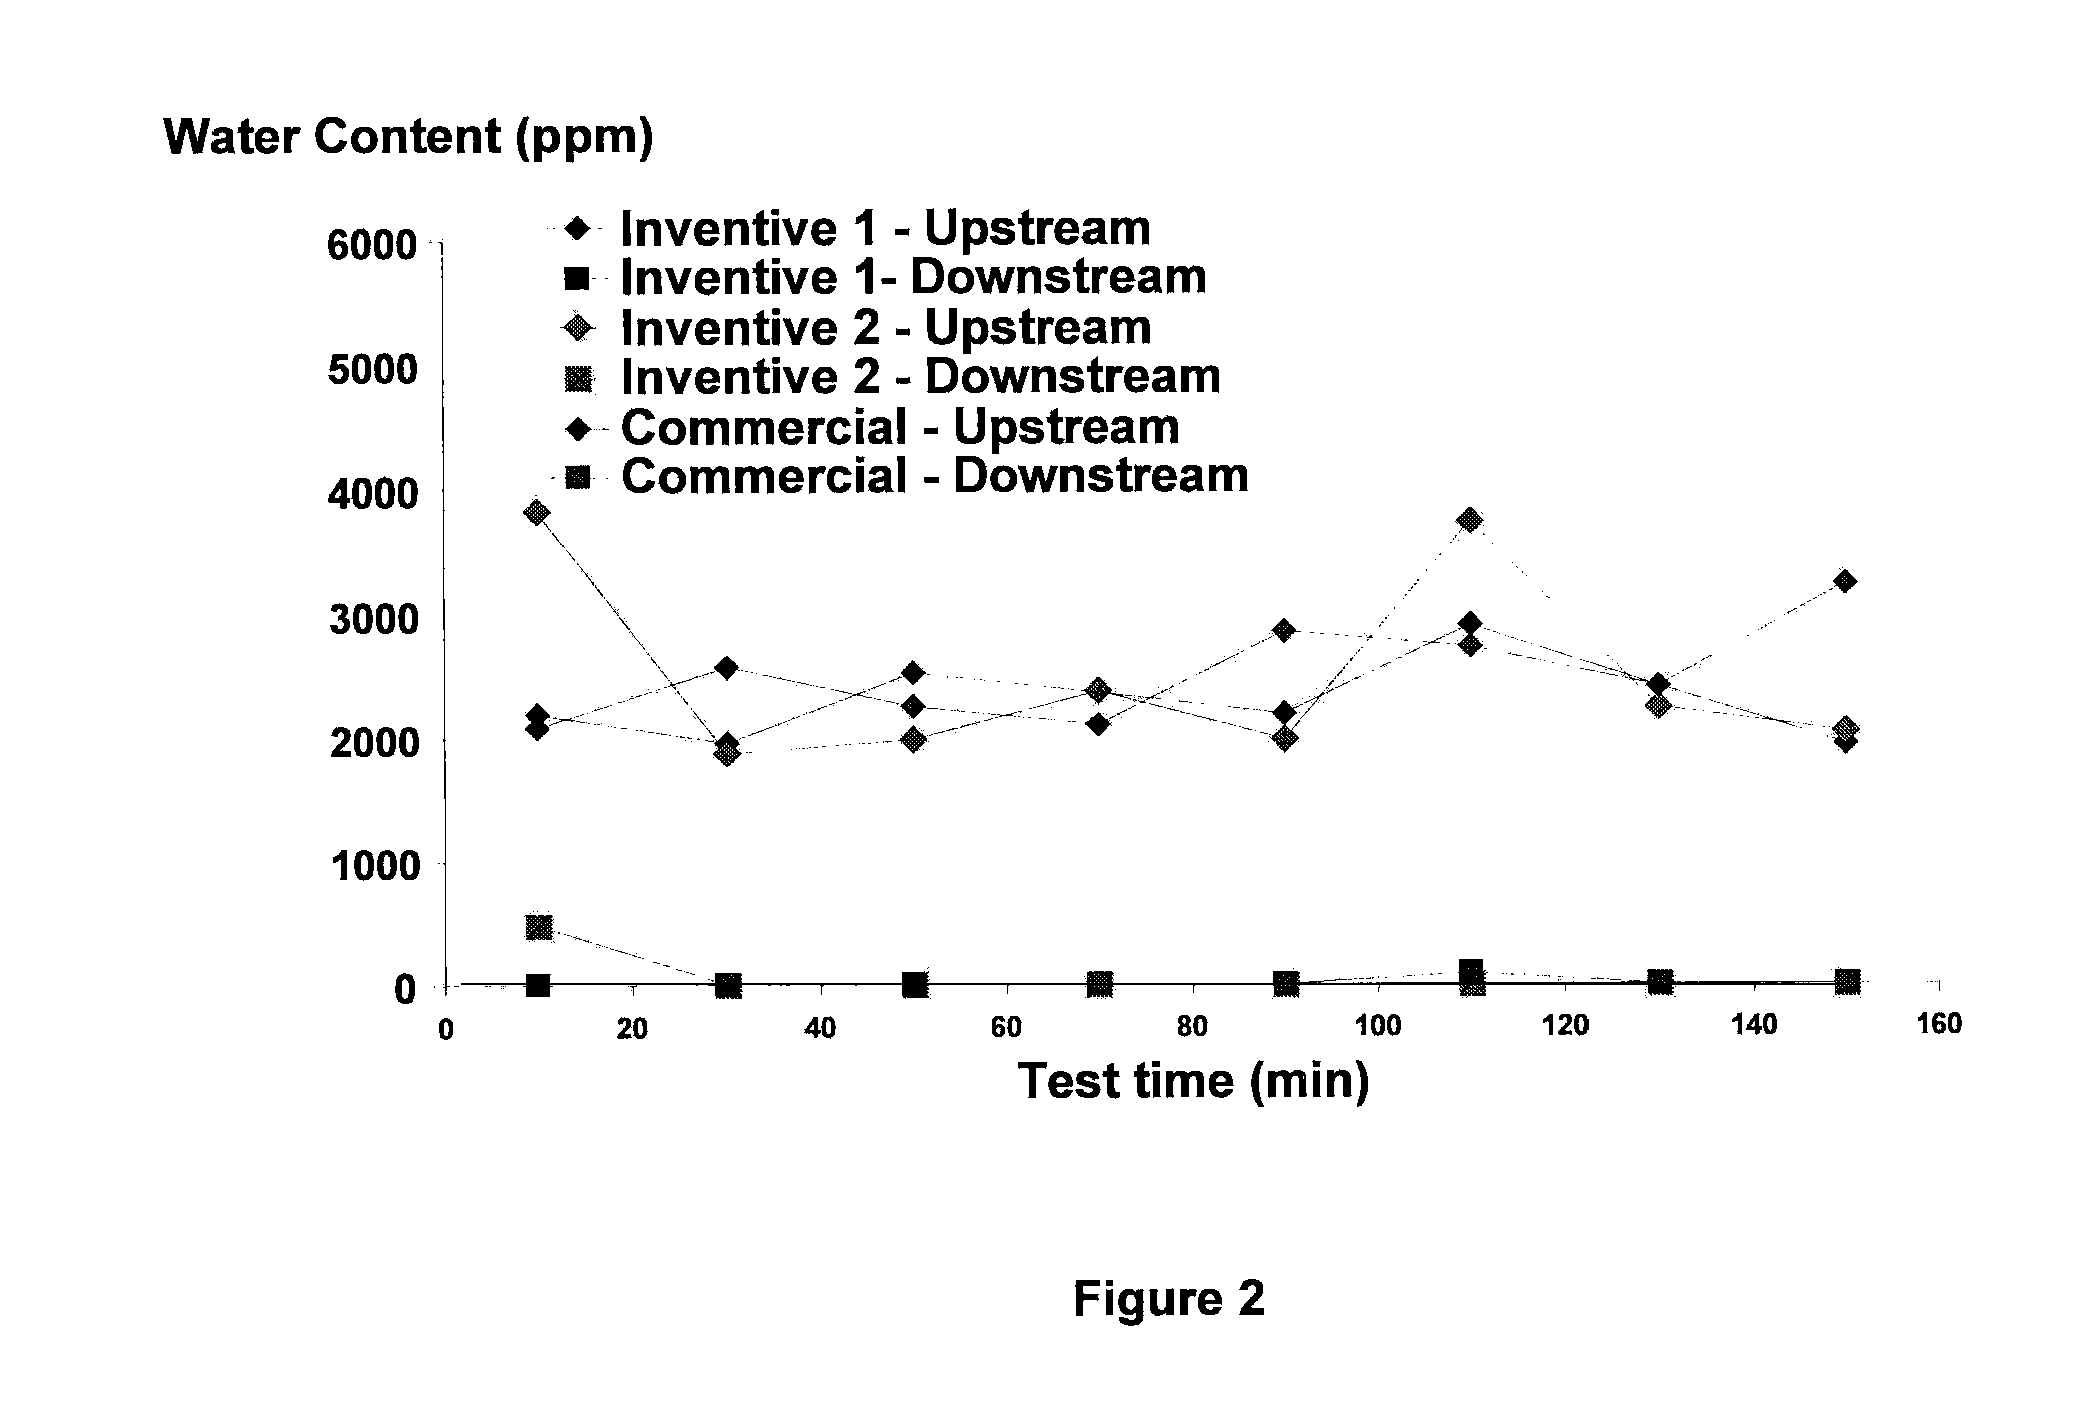 Device including carbon nanotube material for separating a liquid emulsion of an organic liquid and water